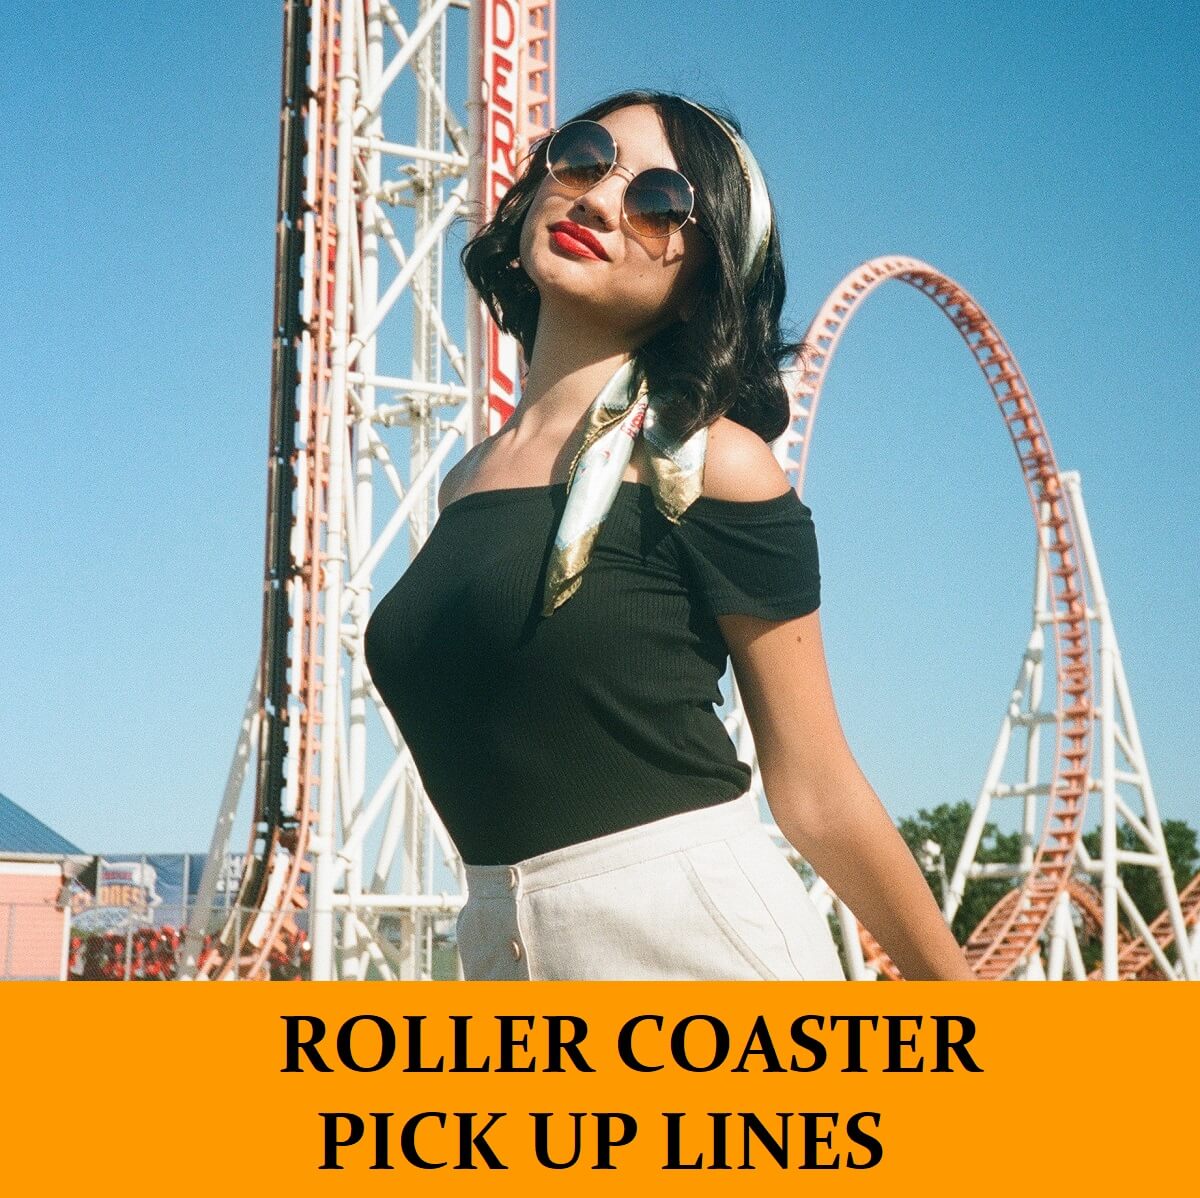 Pick Up Lines About Roller Coasters